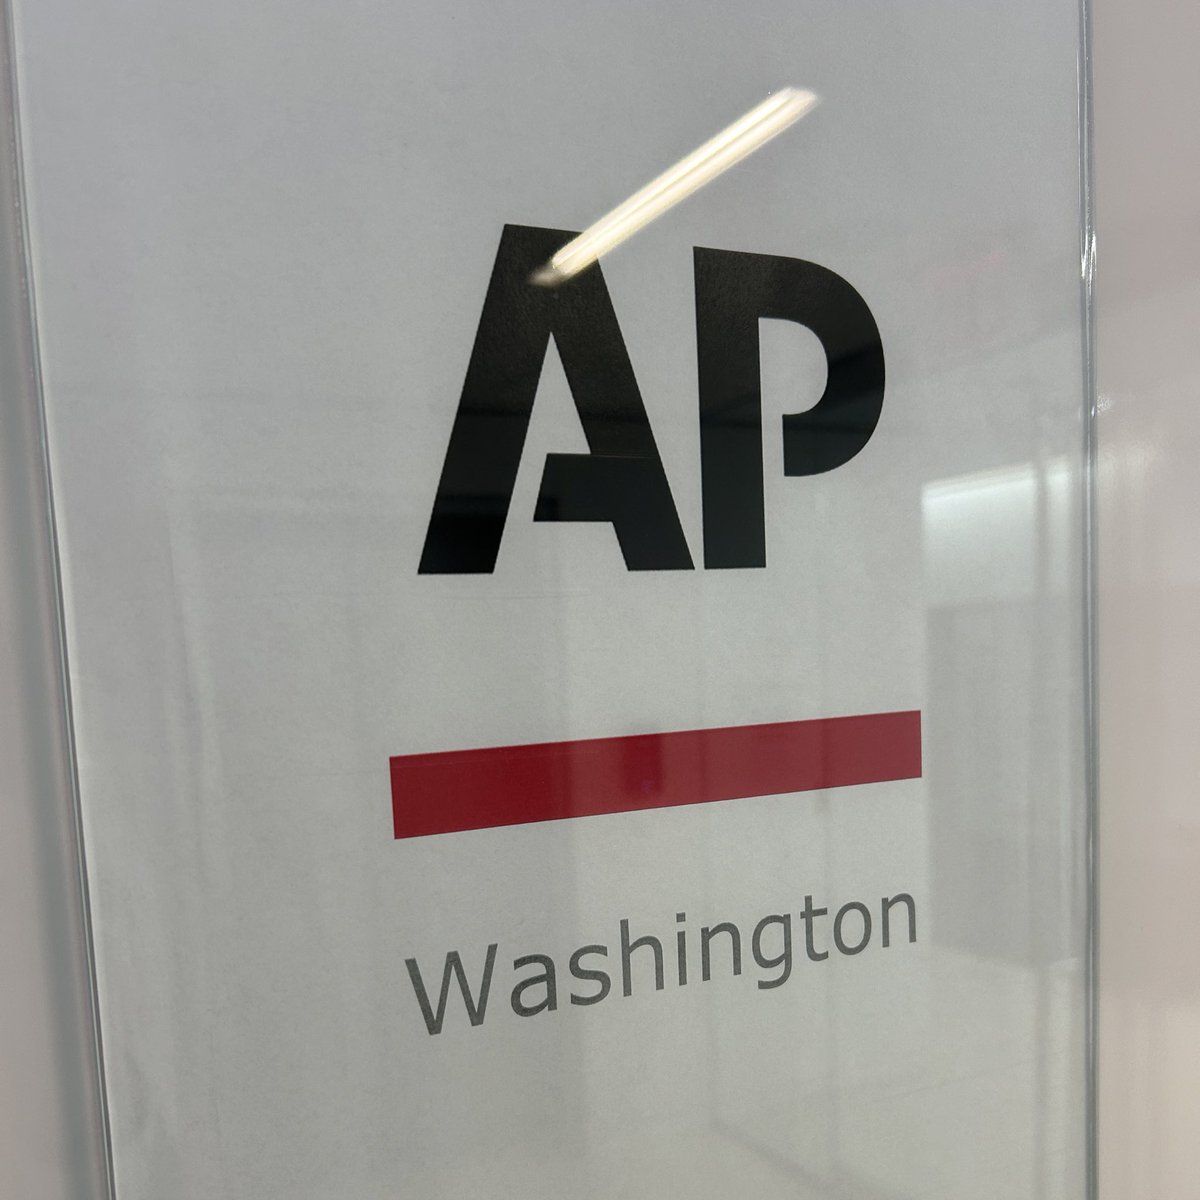 Exciting update: Today is my first day with @AP Investigations. I’ll be focused on politics, particularly the way artificial intelligence is being used this election cycle. It’s an honor to be joining such a storied news organization. Can’t wait to get to work.